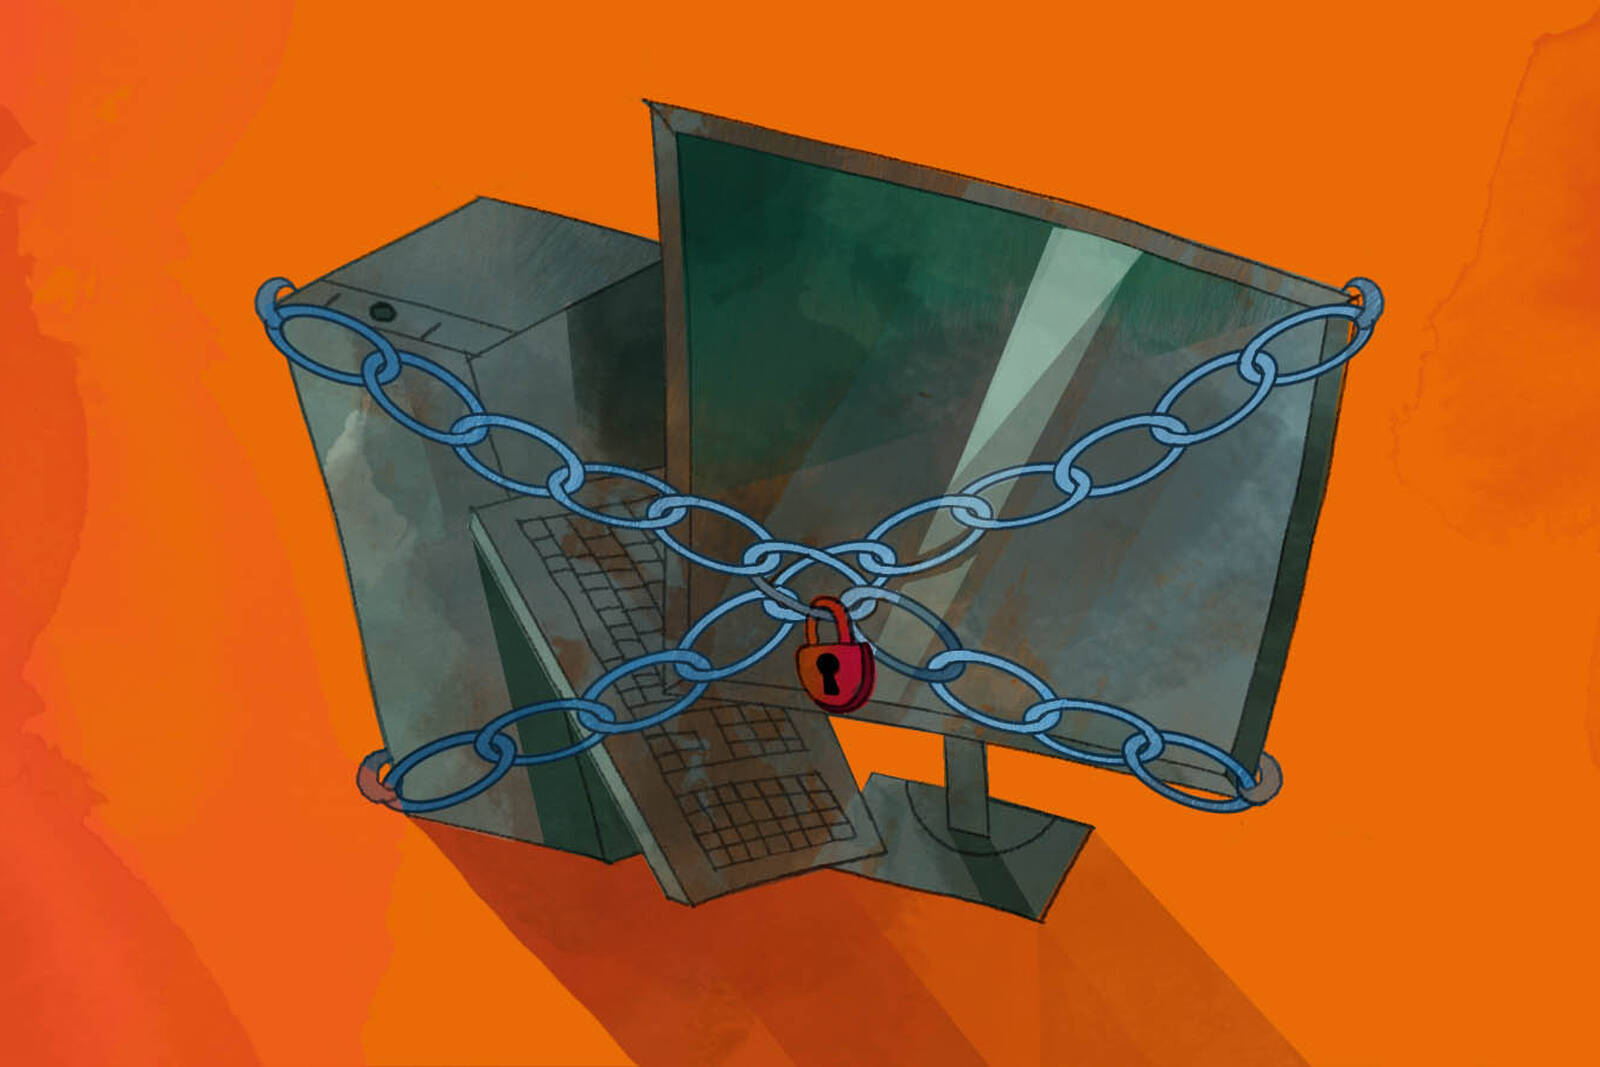 computer surrounded by chains and padlocks